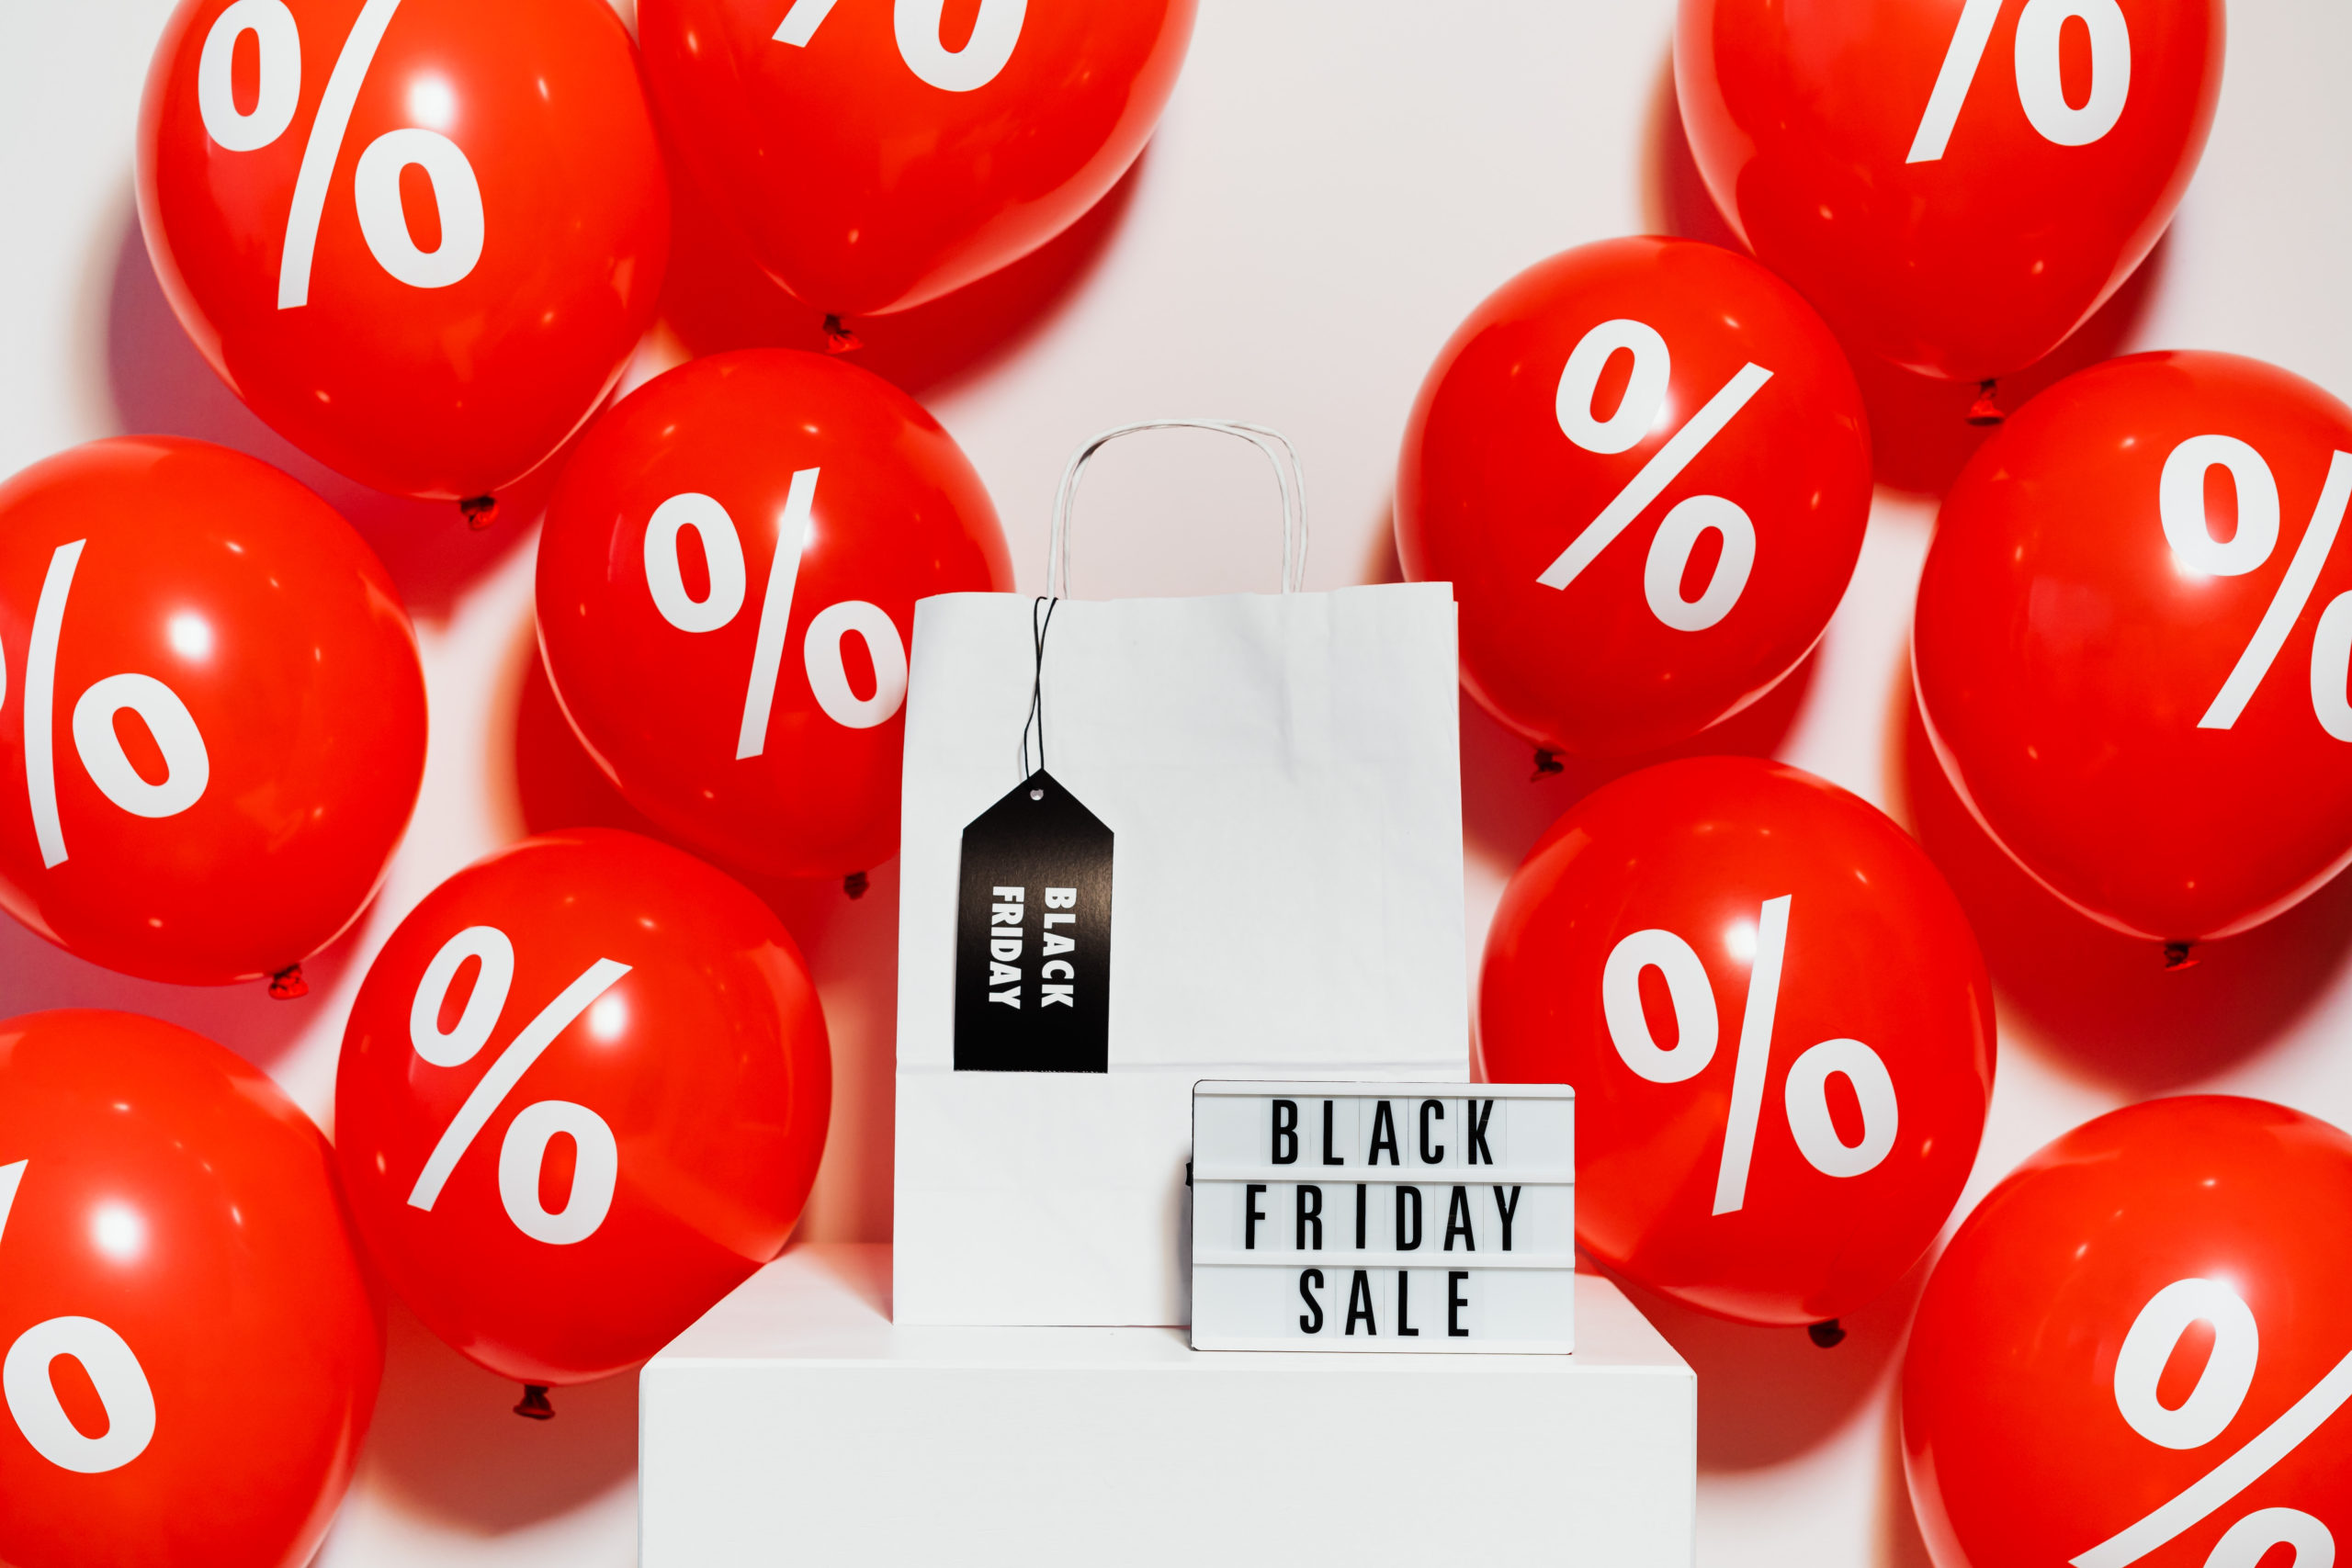 Our Black Friday Sale has started. Enjoy the biggest discounts all